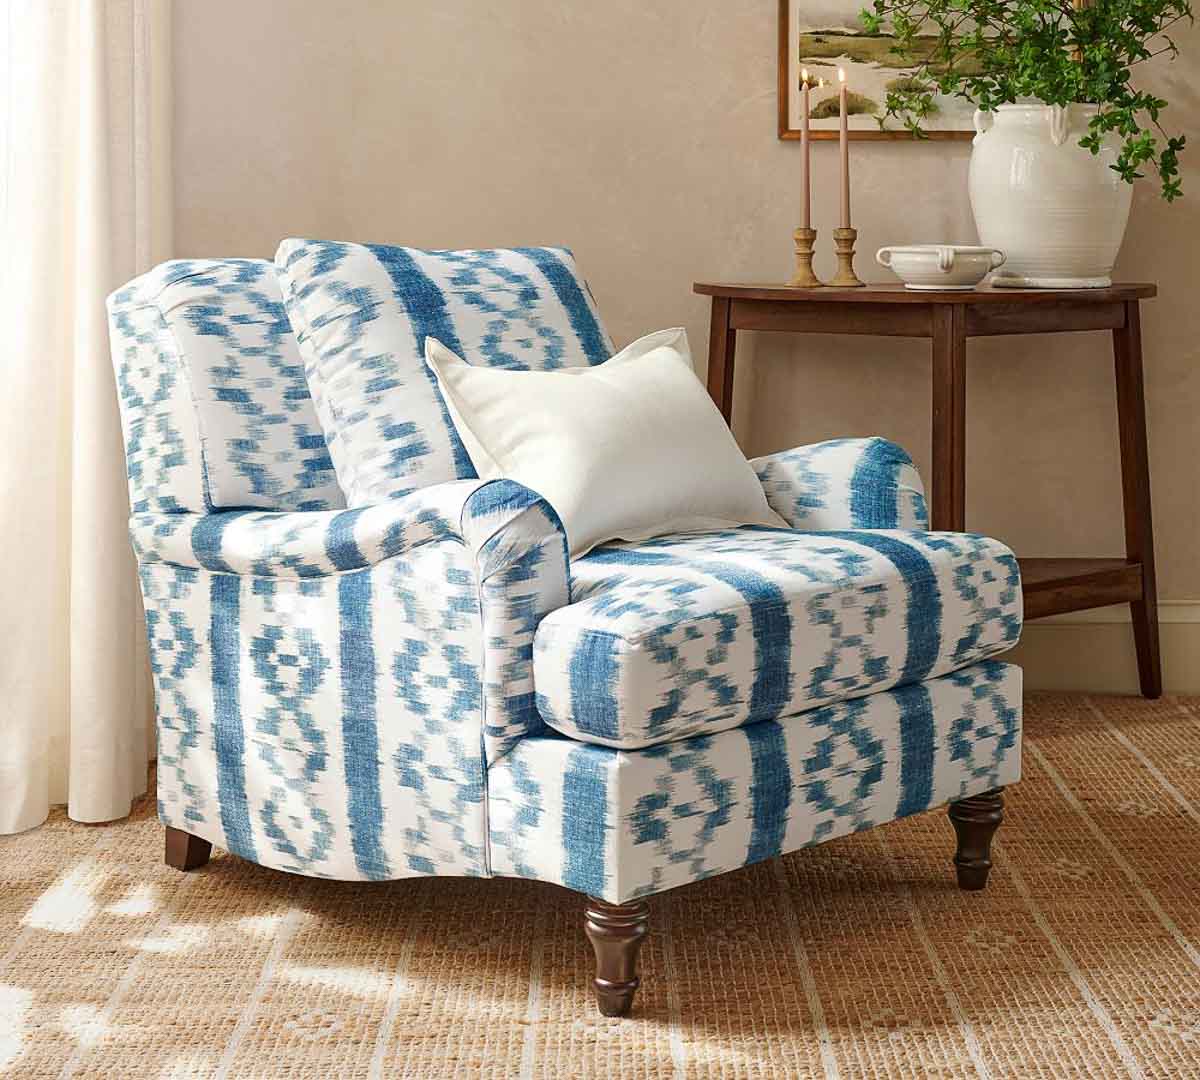 armchair upholstered with blue and white striped fabric